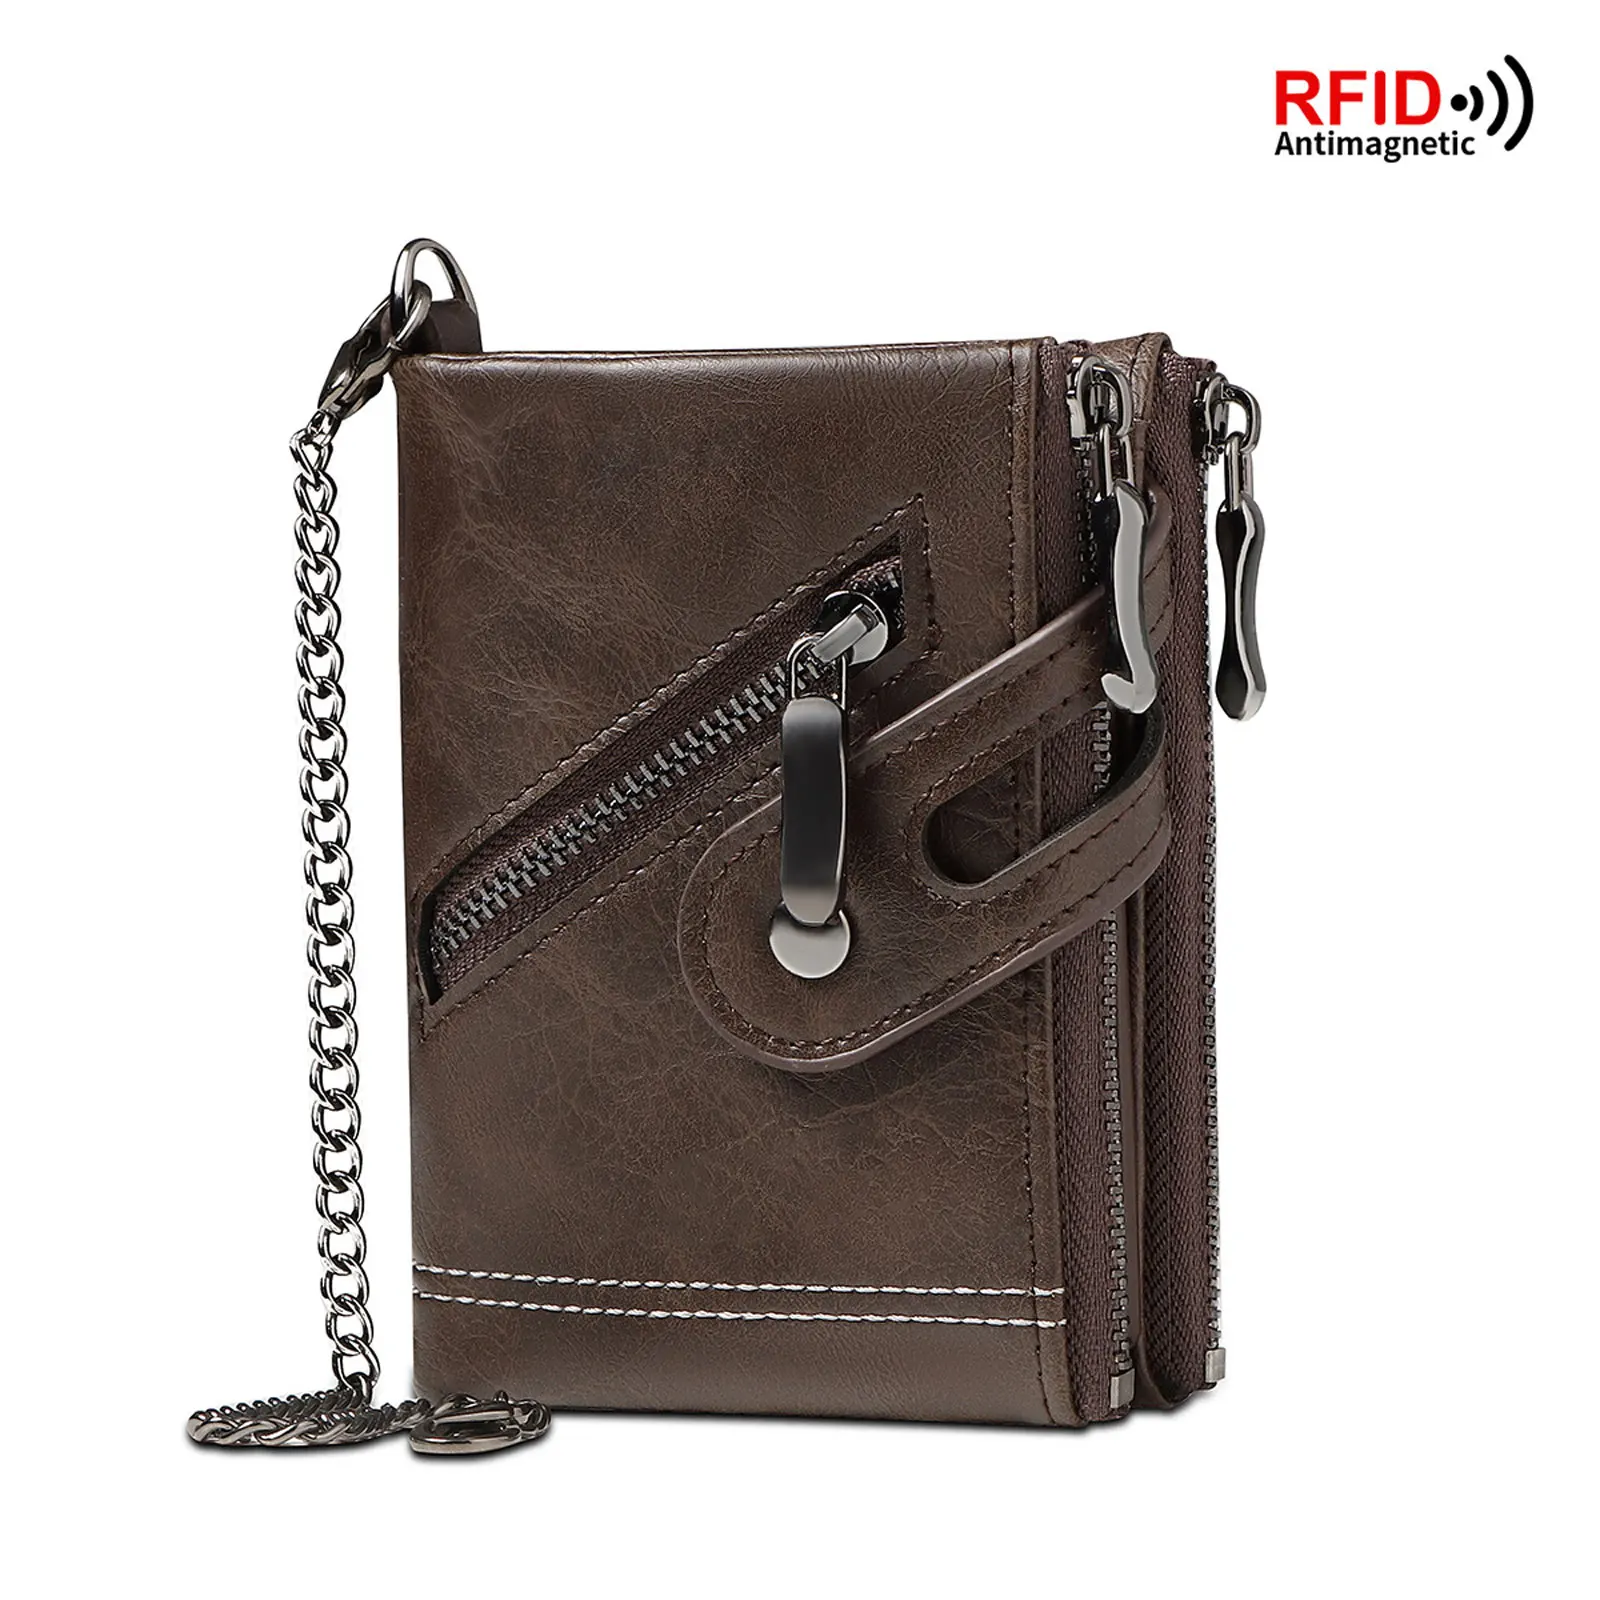 

Men's Wallets Multifunctional RFID Blocking Leather Wallet with Chain Decor Credit Card Holder Bifold Compact Coin Purse for Men